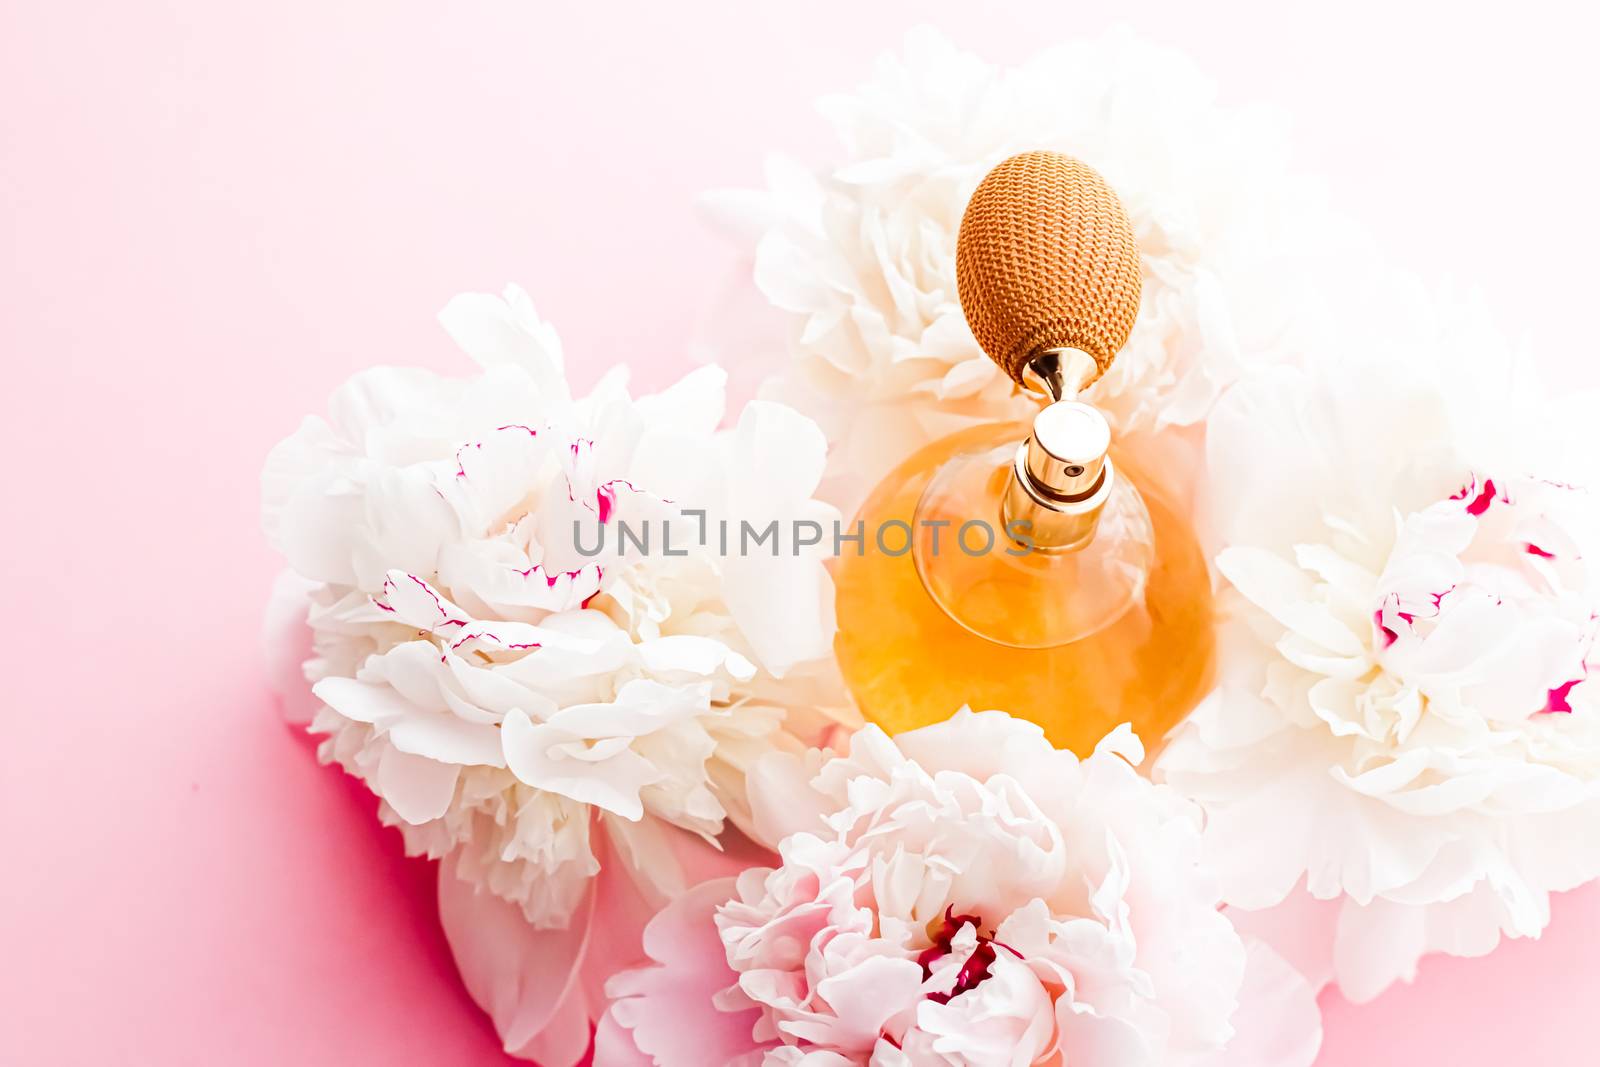 Chic fragrance bottle as citrus perfume product on background of peony flowers, parfum ad and beauty branding by Anneleven